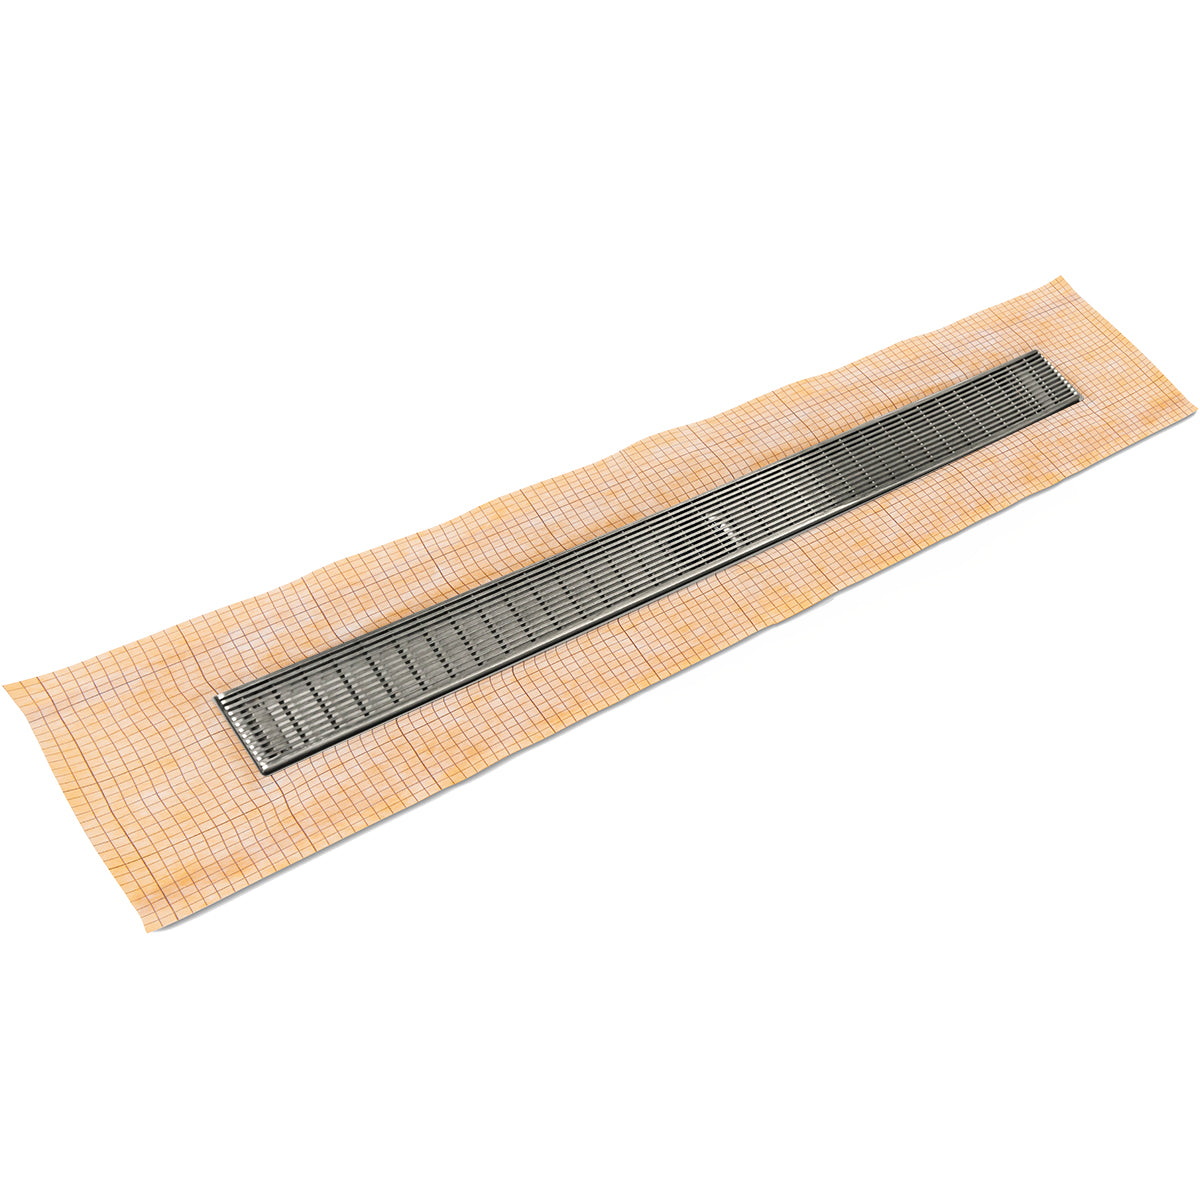 Infinity Drain 42" FCS Series Schluter-Kerdi - Fixed Flange Linear Drain Kit with 2 1/2" Wedge Wire Grate